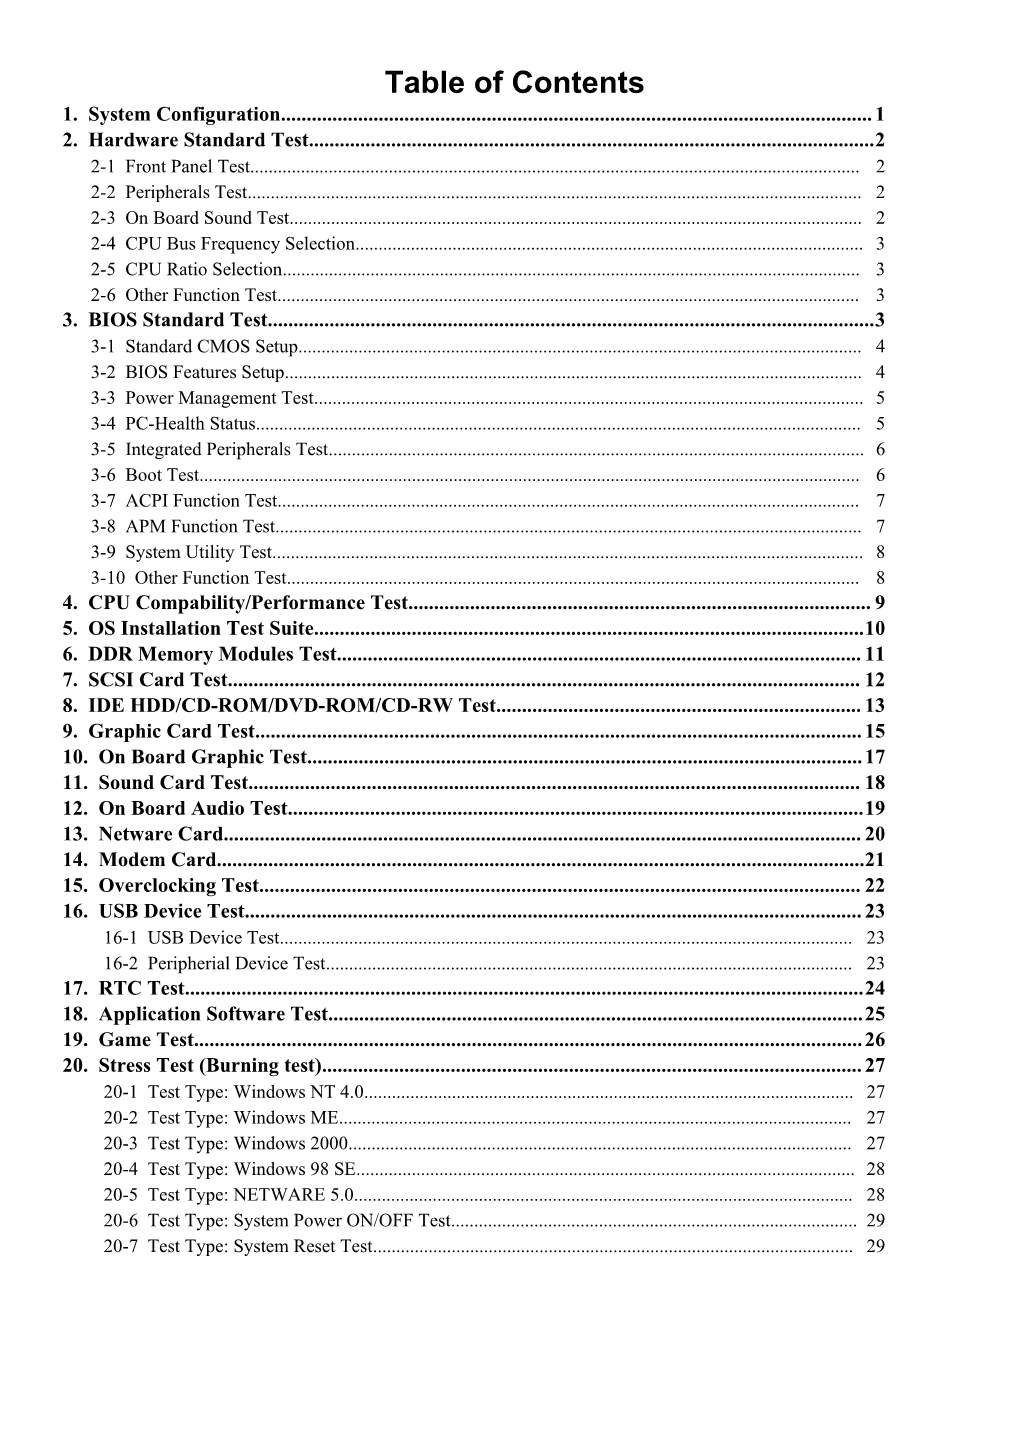 Table of Contents s643